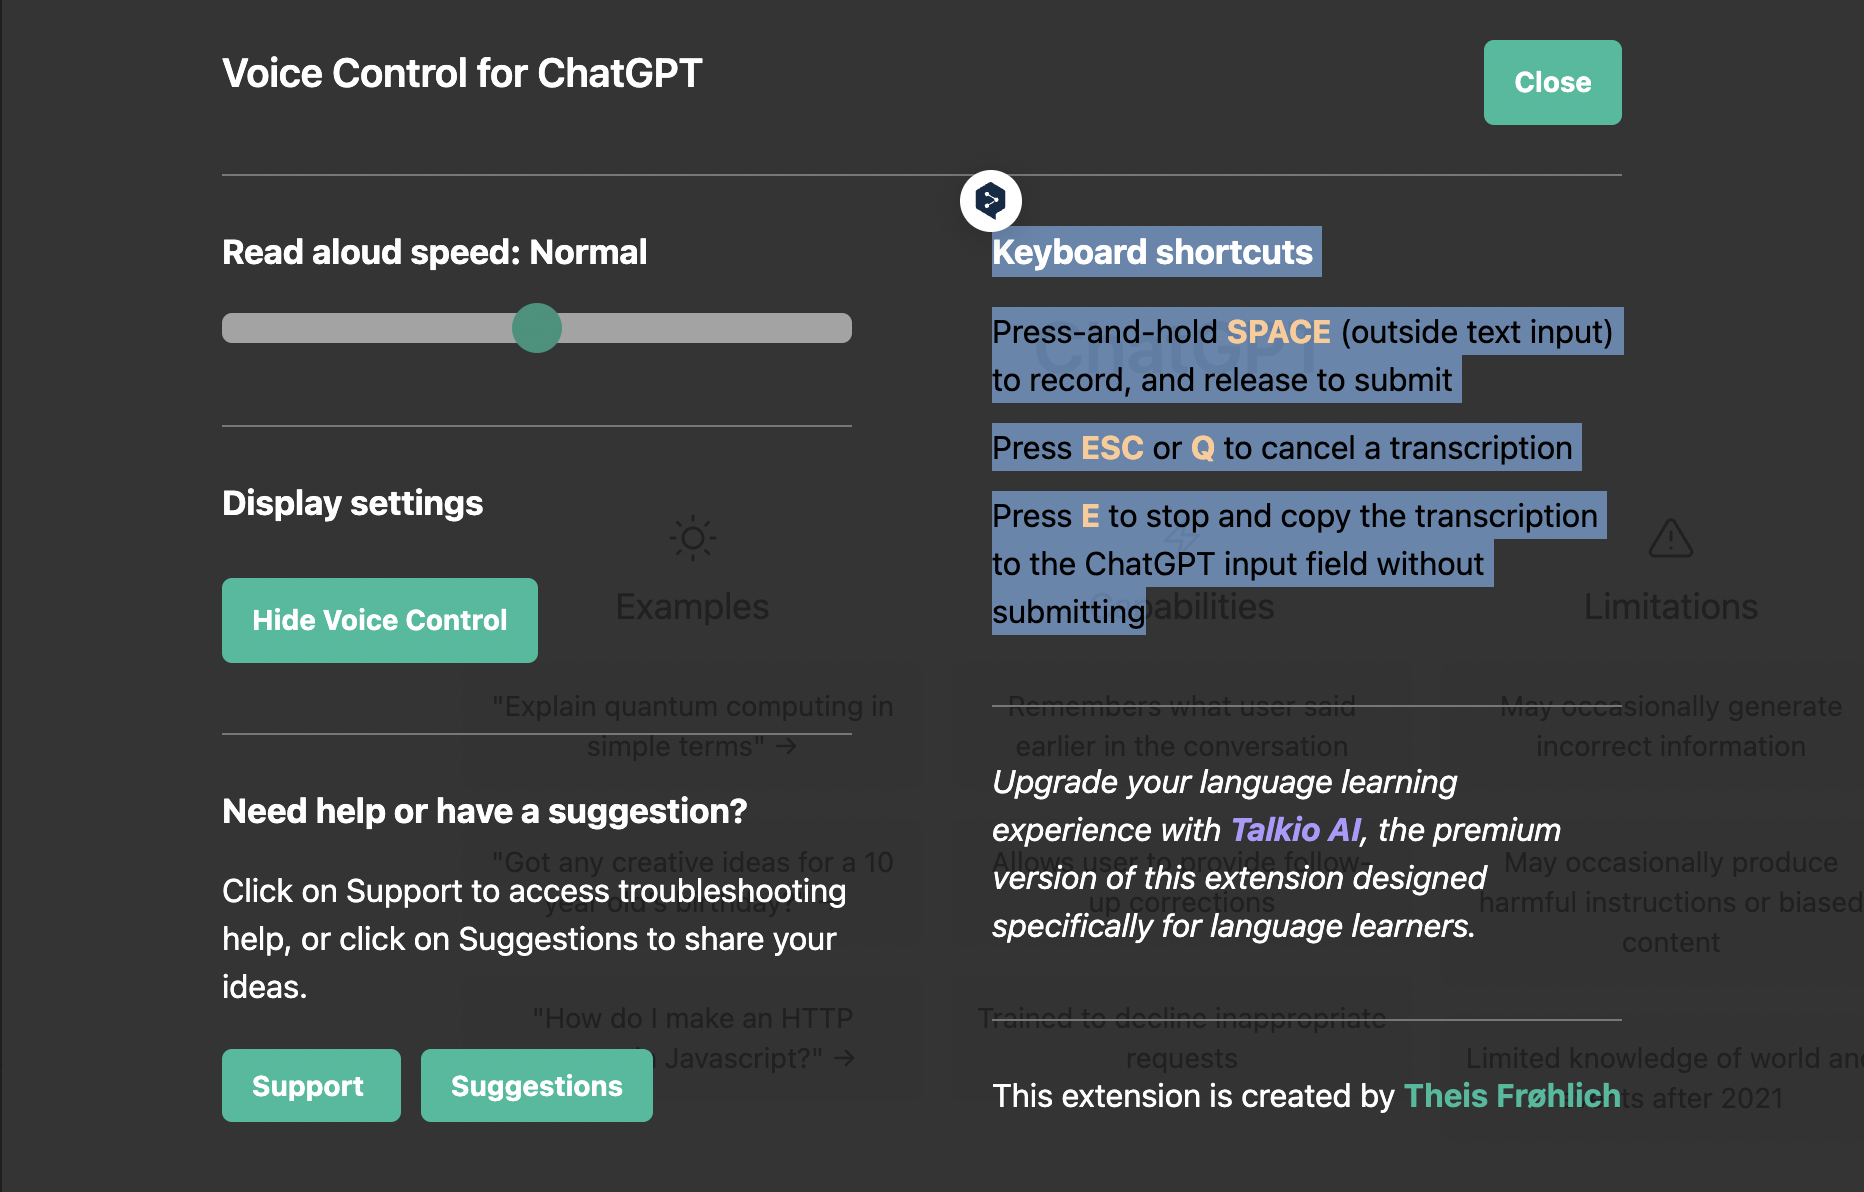 This Chrome extension allows you to have voice conversations with ChatGPT.